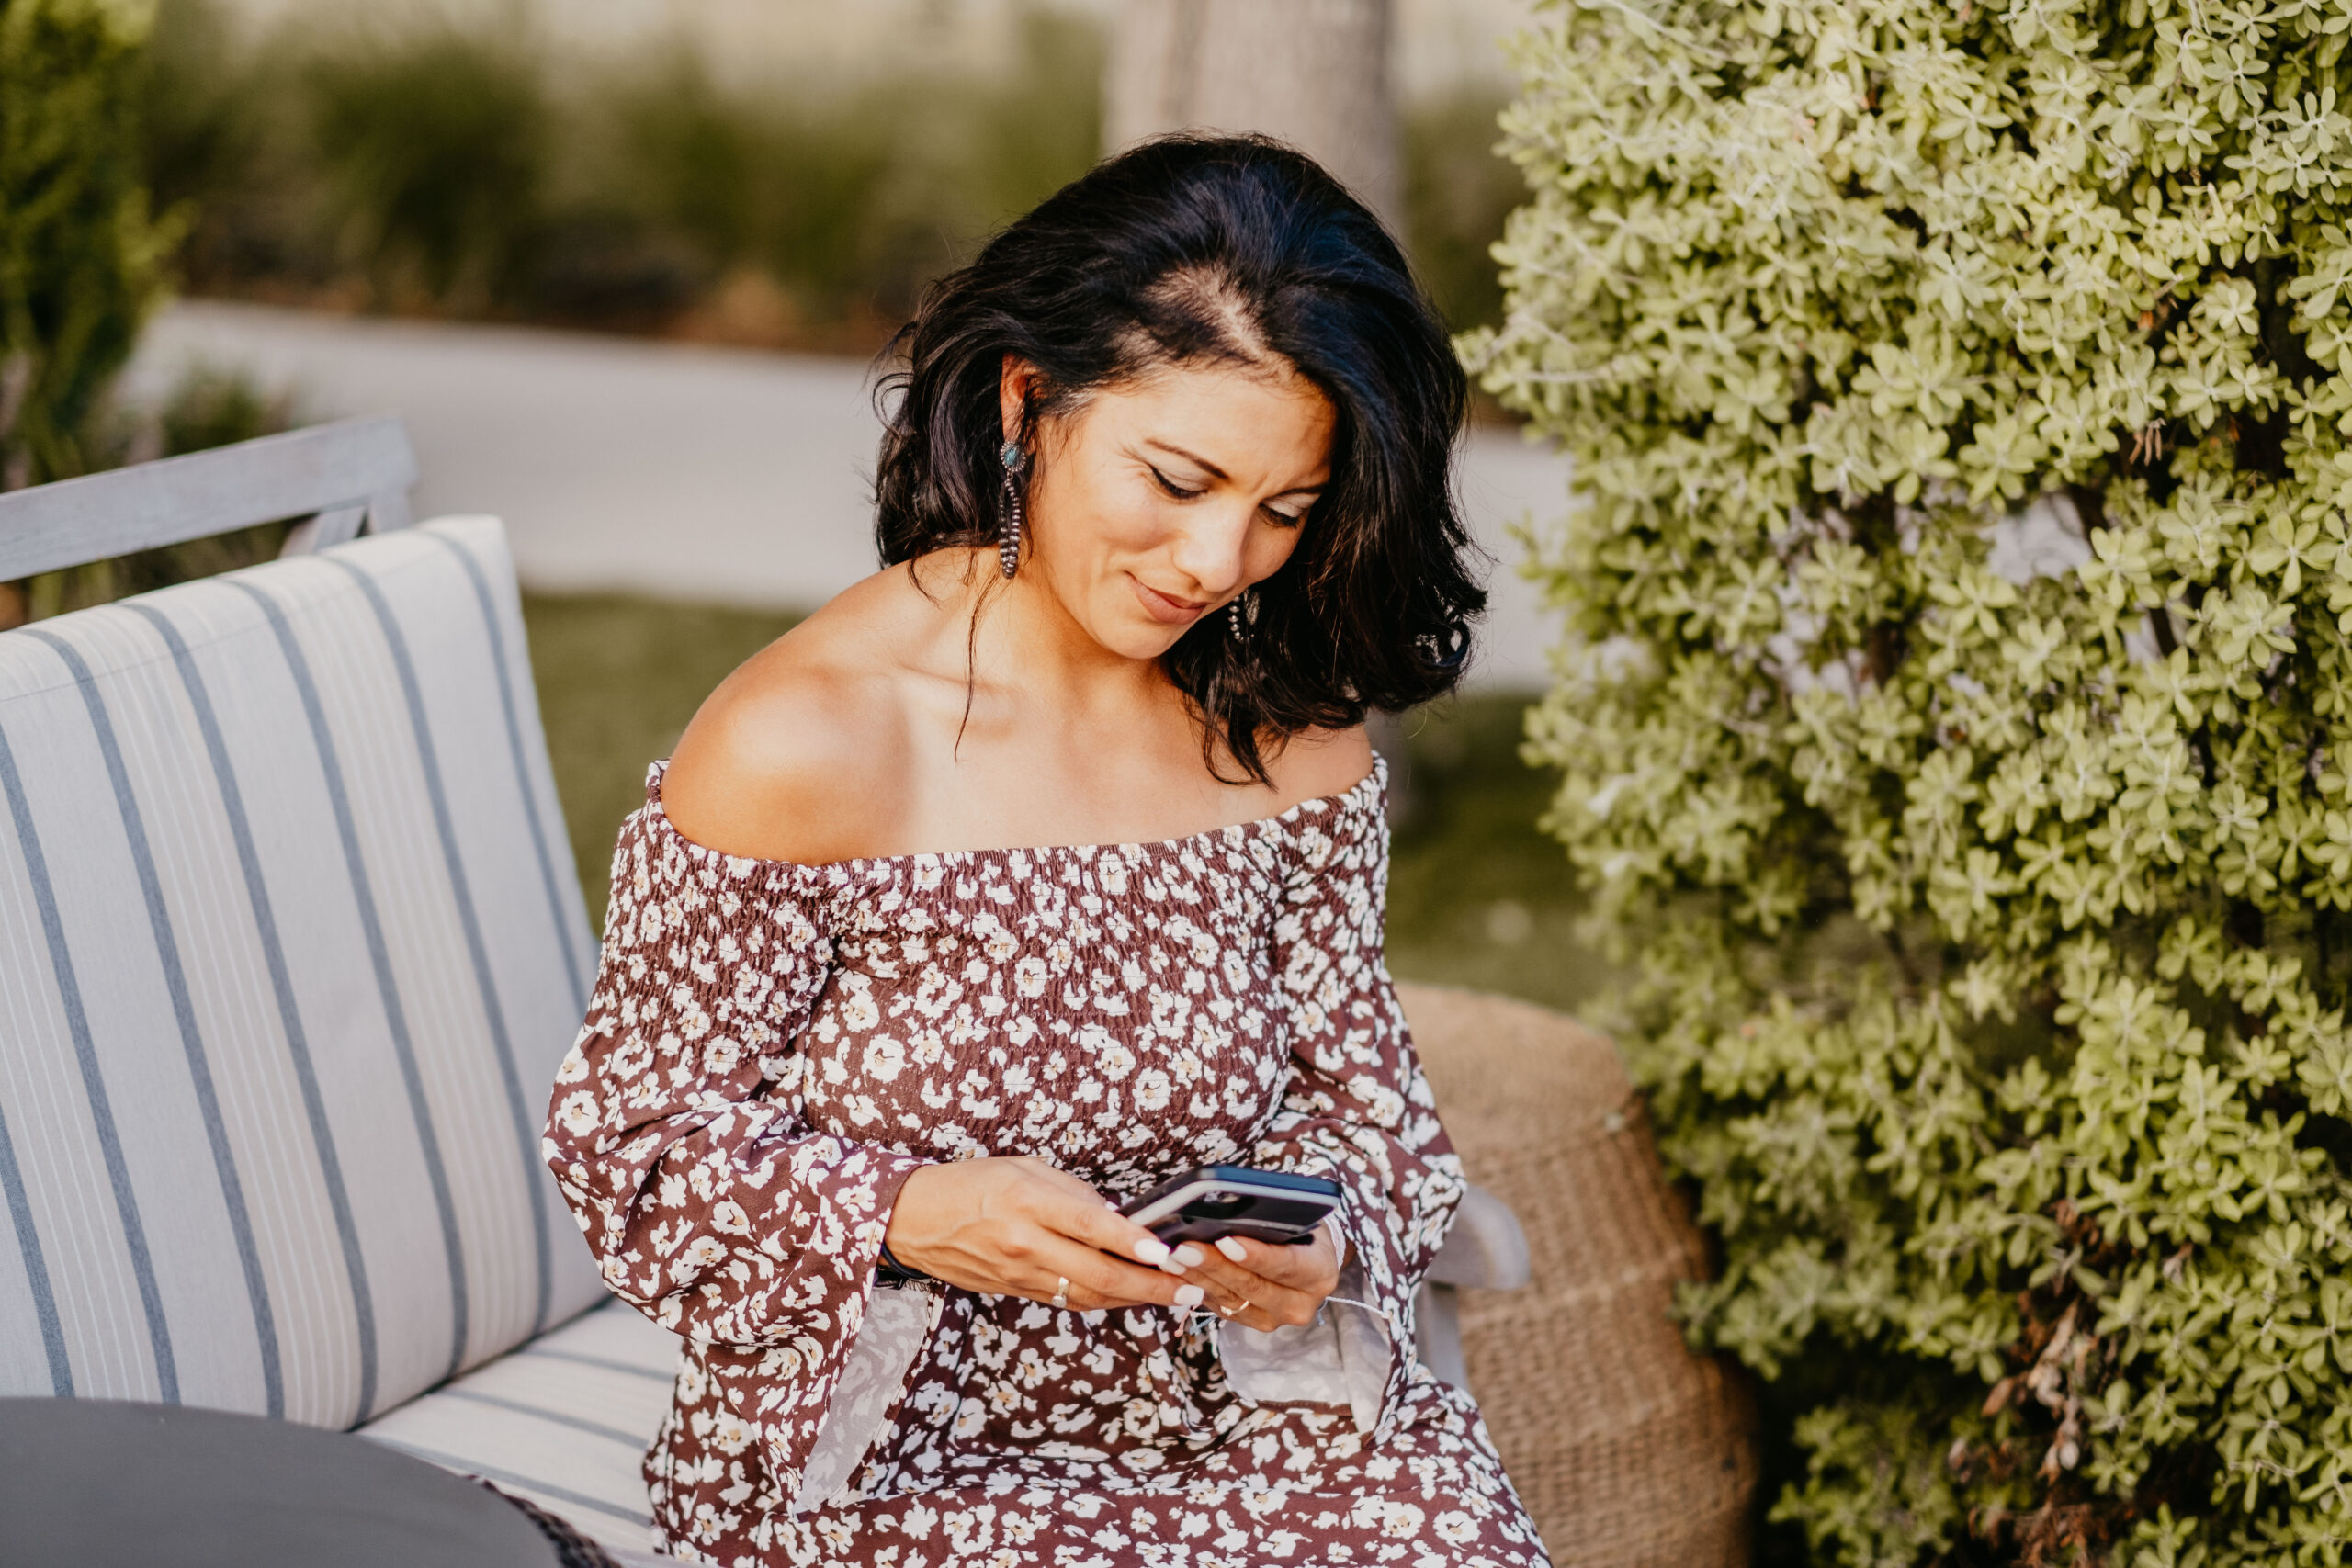 Susie Maldonado with shoulder-length dark hair sits on an outdoor bench, looking at her smartphone. She wears an off-shoulder, floral dress, with green foliage in the background. Amidst thriving greenery, she seems deep in thought, perhaps pondering the transformative secrets of midlife.